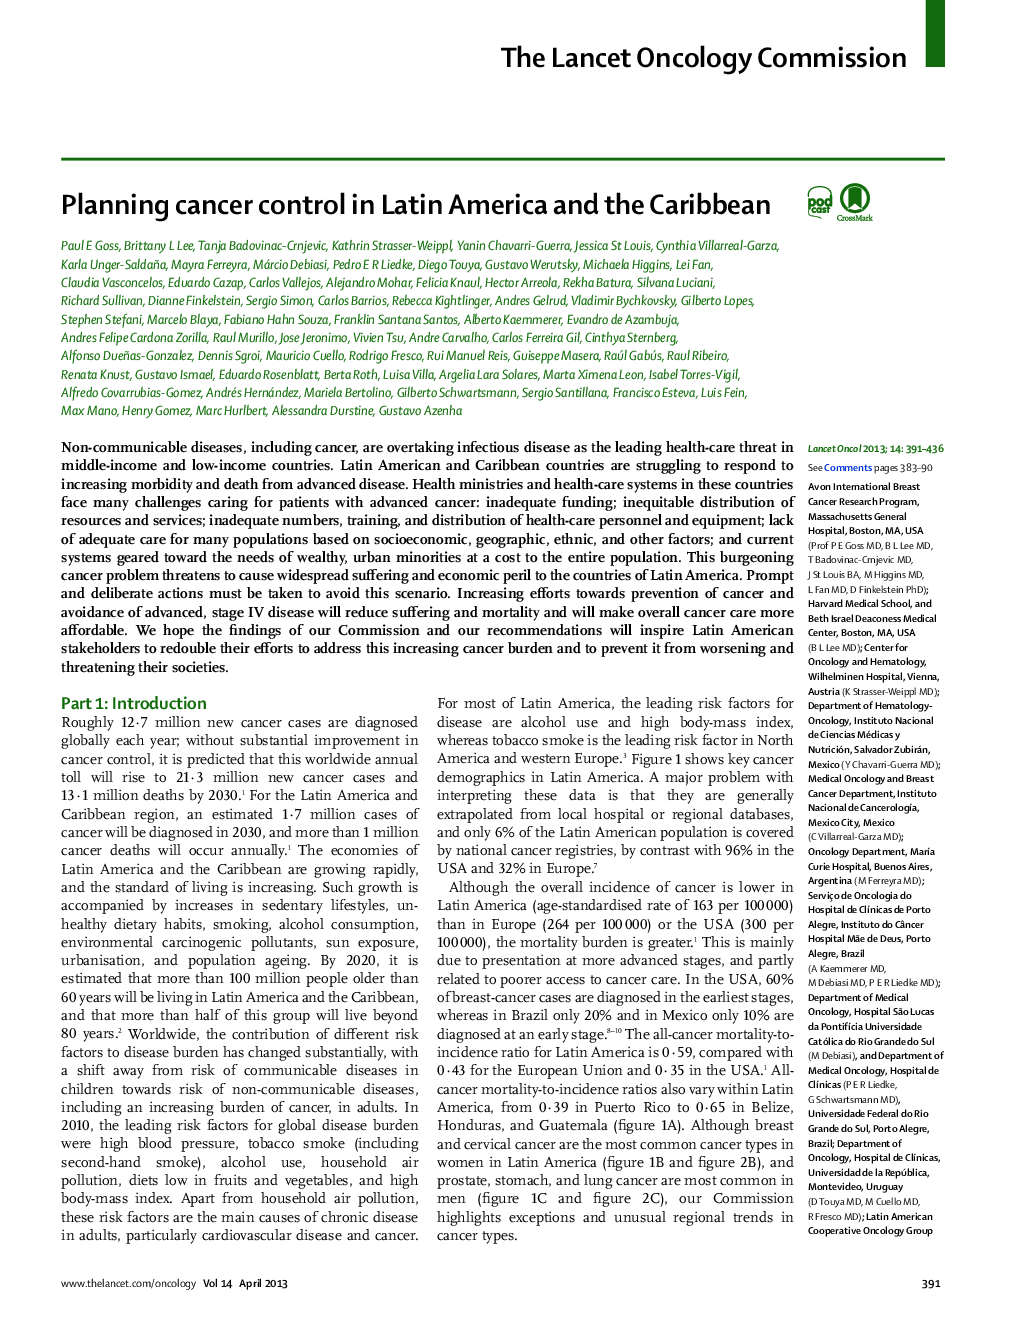 Planning cancer control in Latin America and the Caribbean